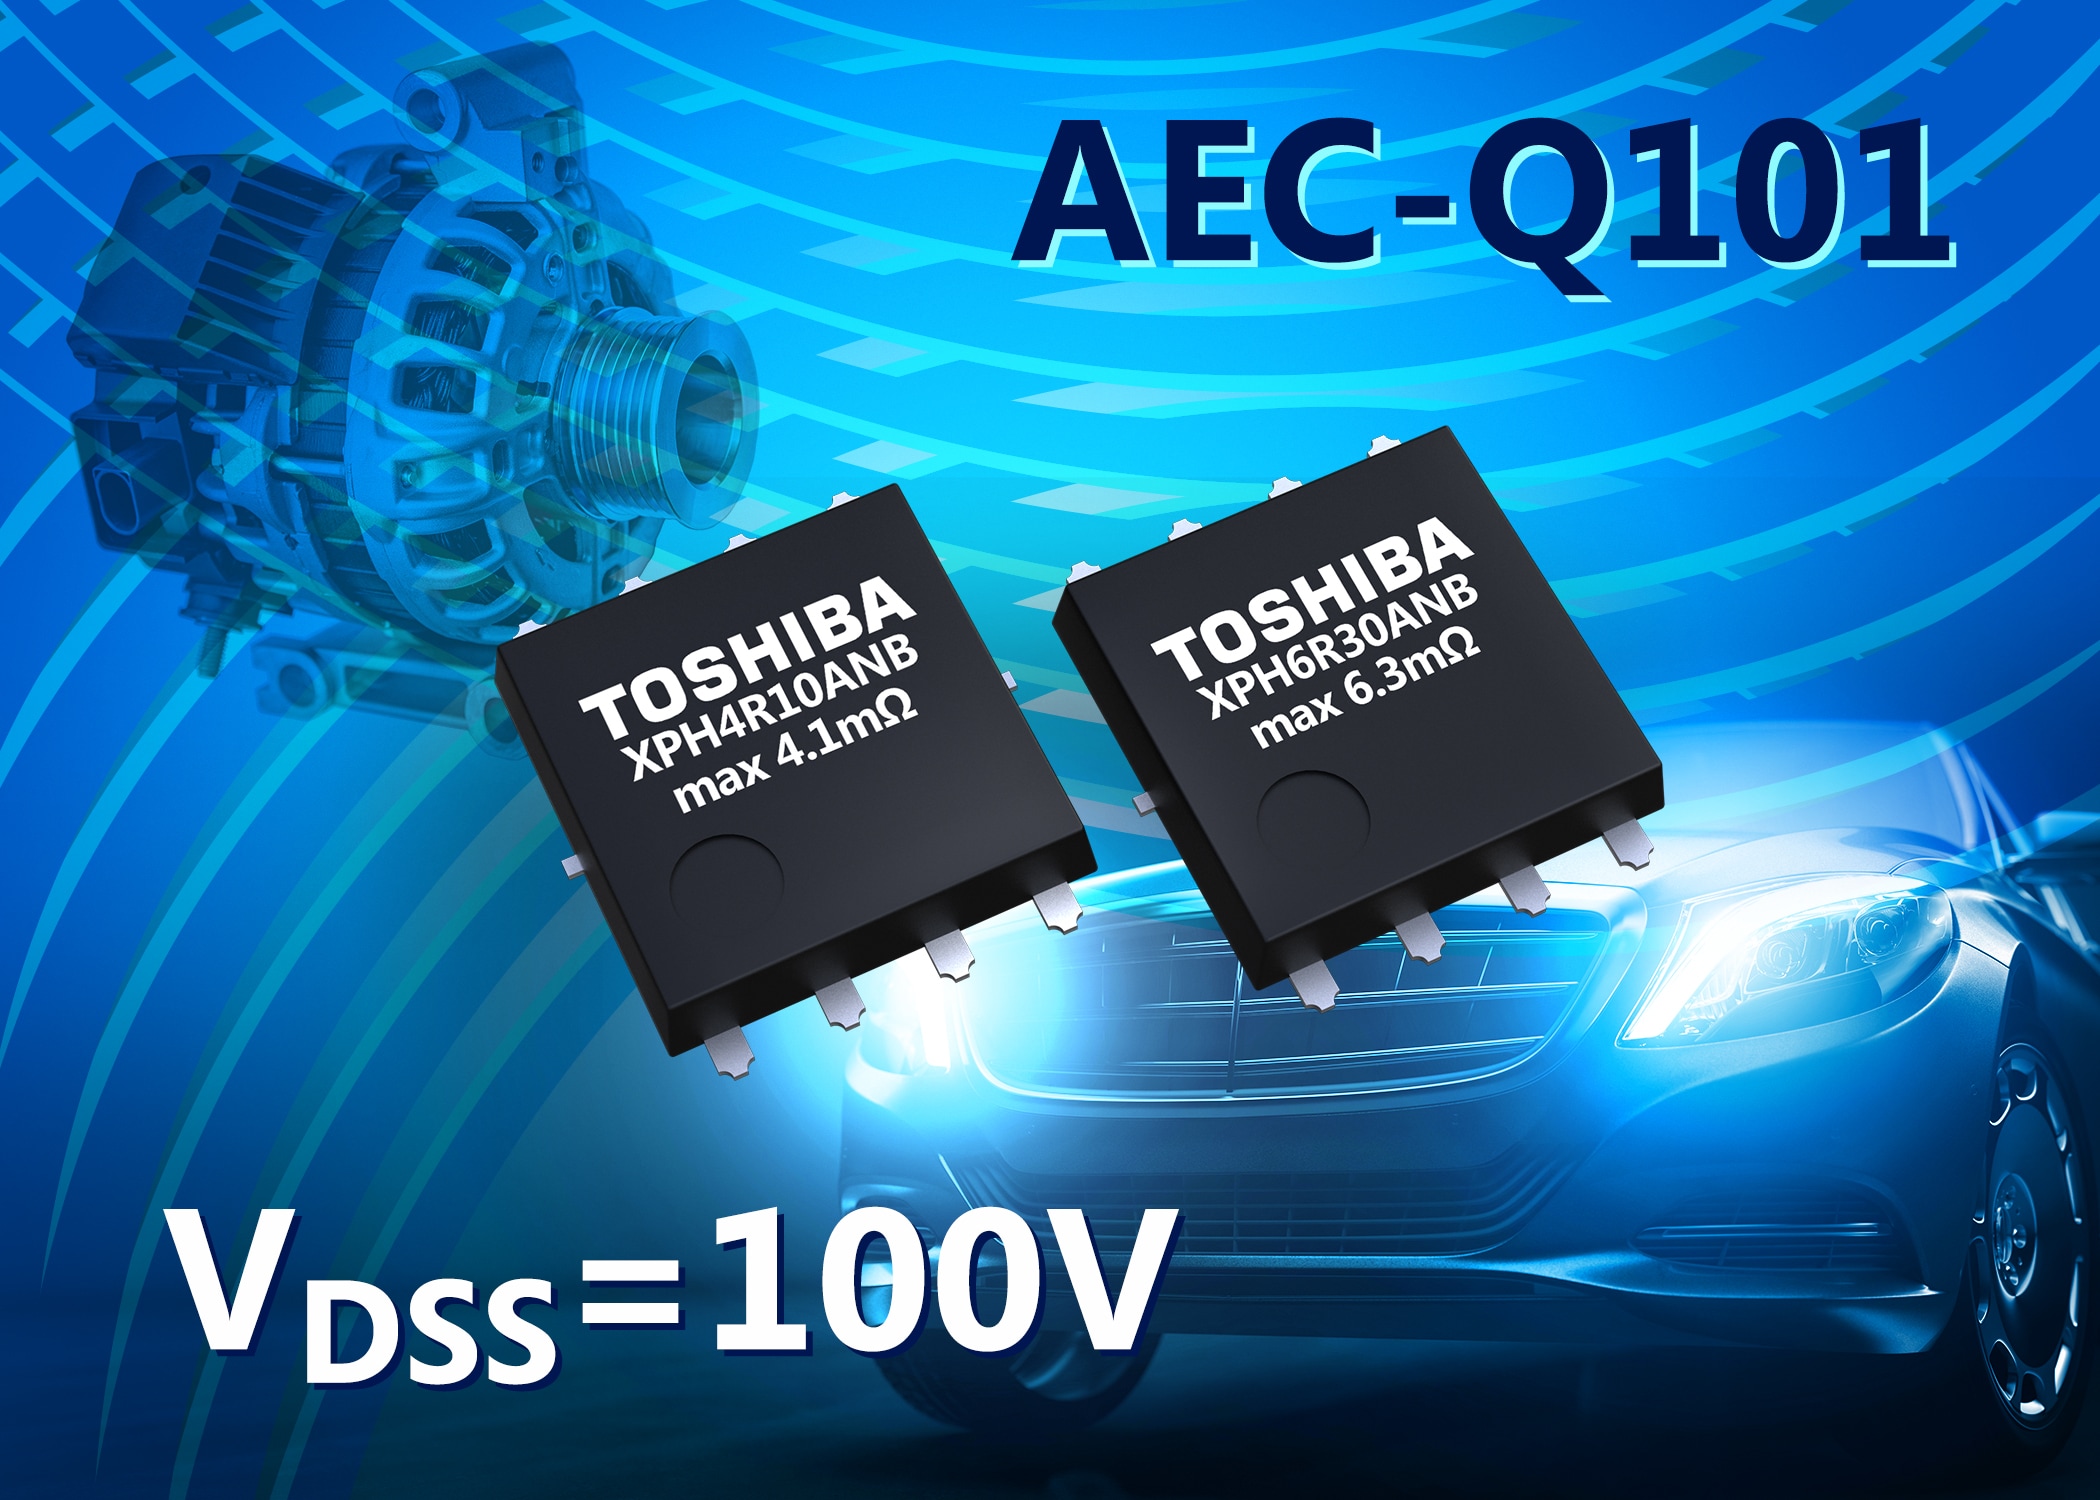 Toshiba announces new 100 V N-channel MOSFETs for automotive applications